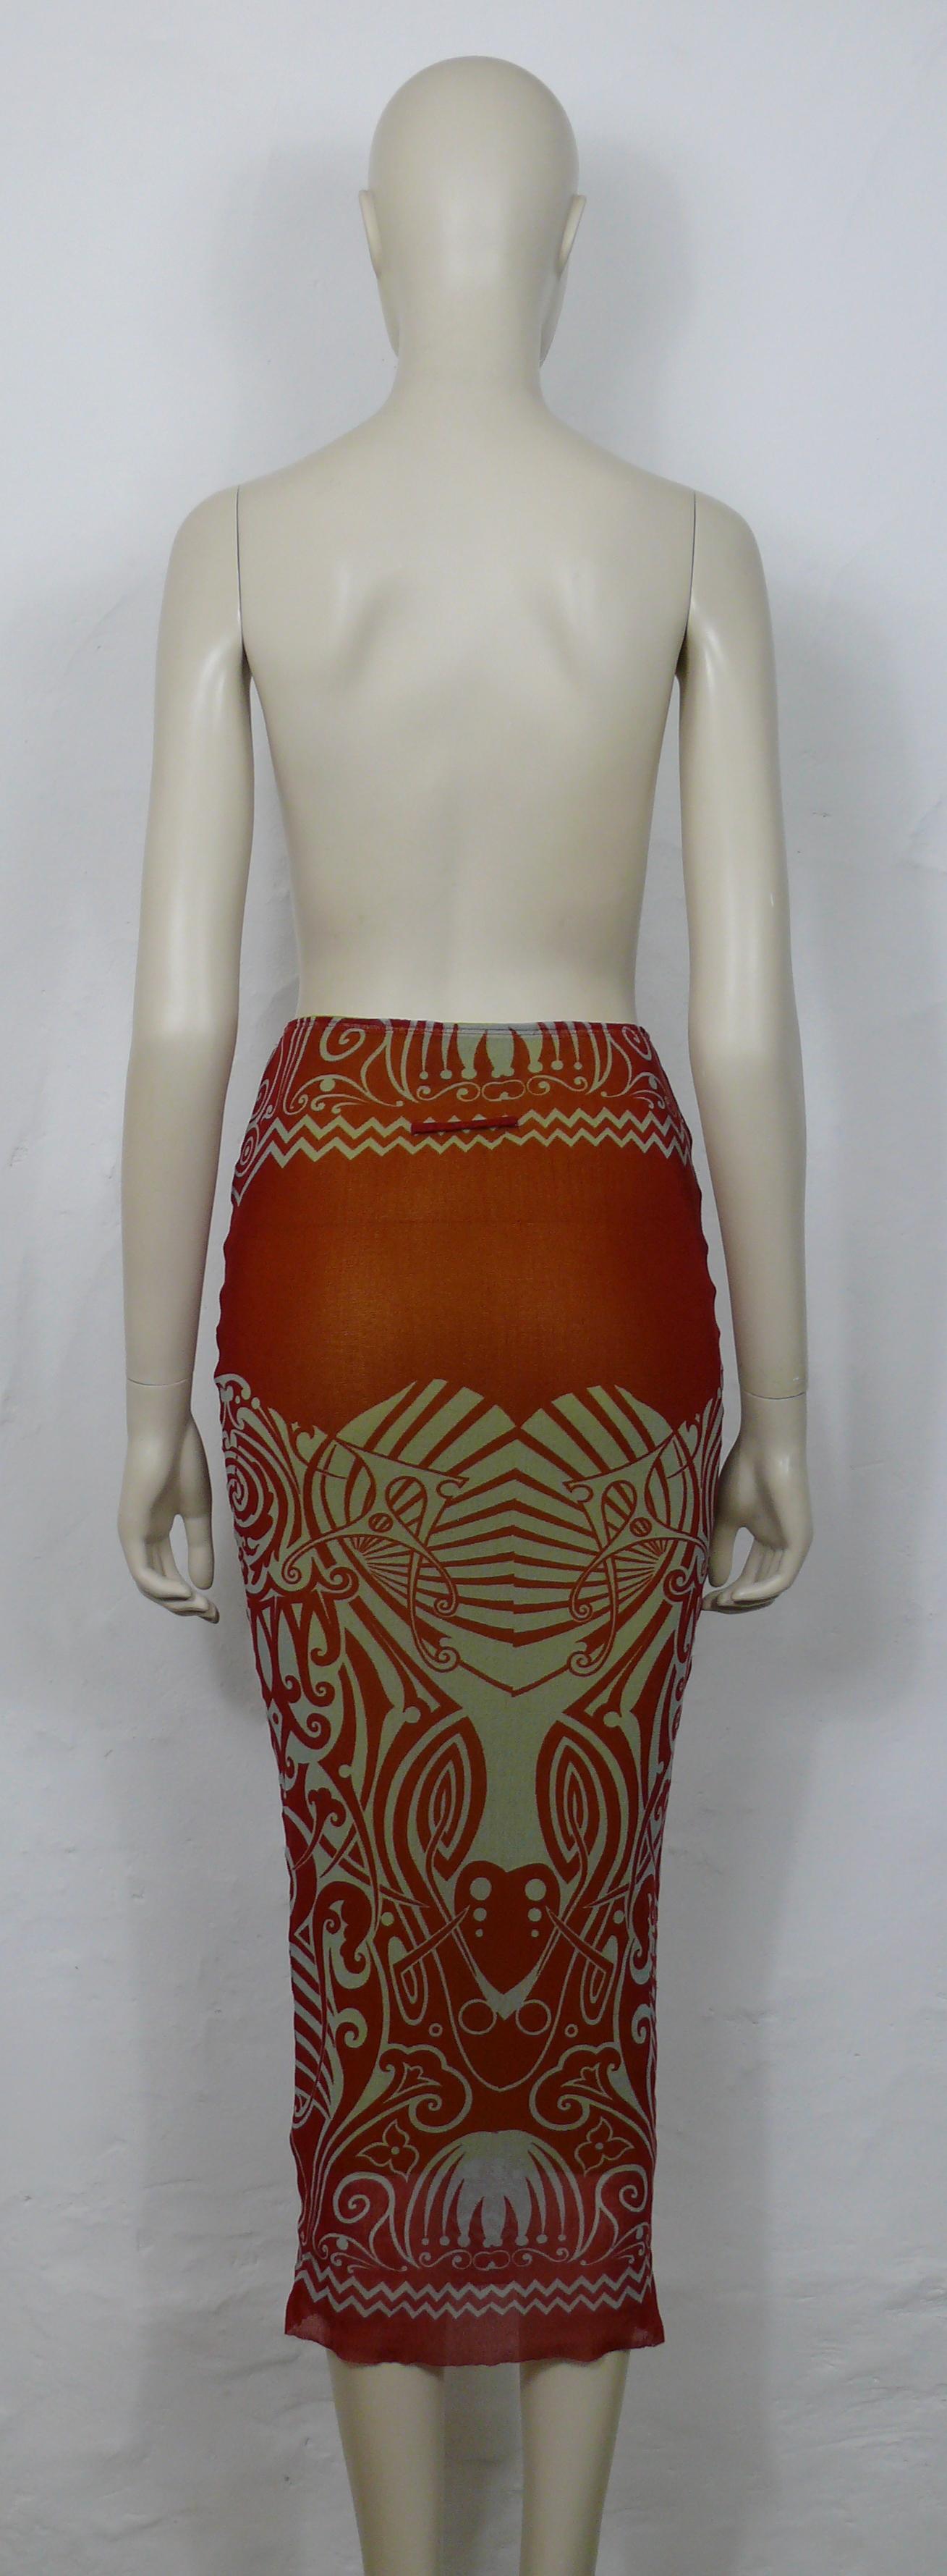 Women's Jean Paul Gaultier Vintage Iconic Tribal Tattoo Print Mesh Skirt Size S For Sale